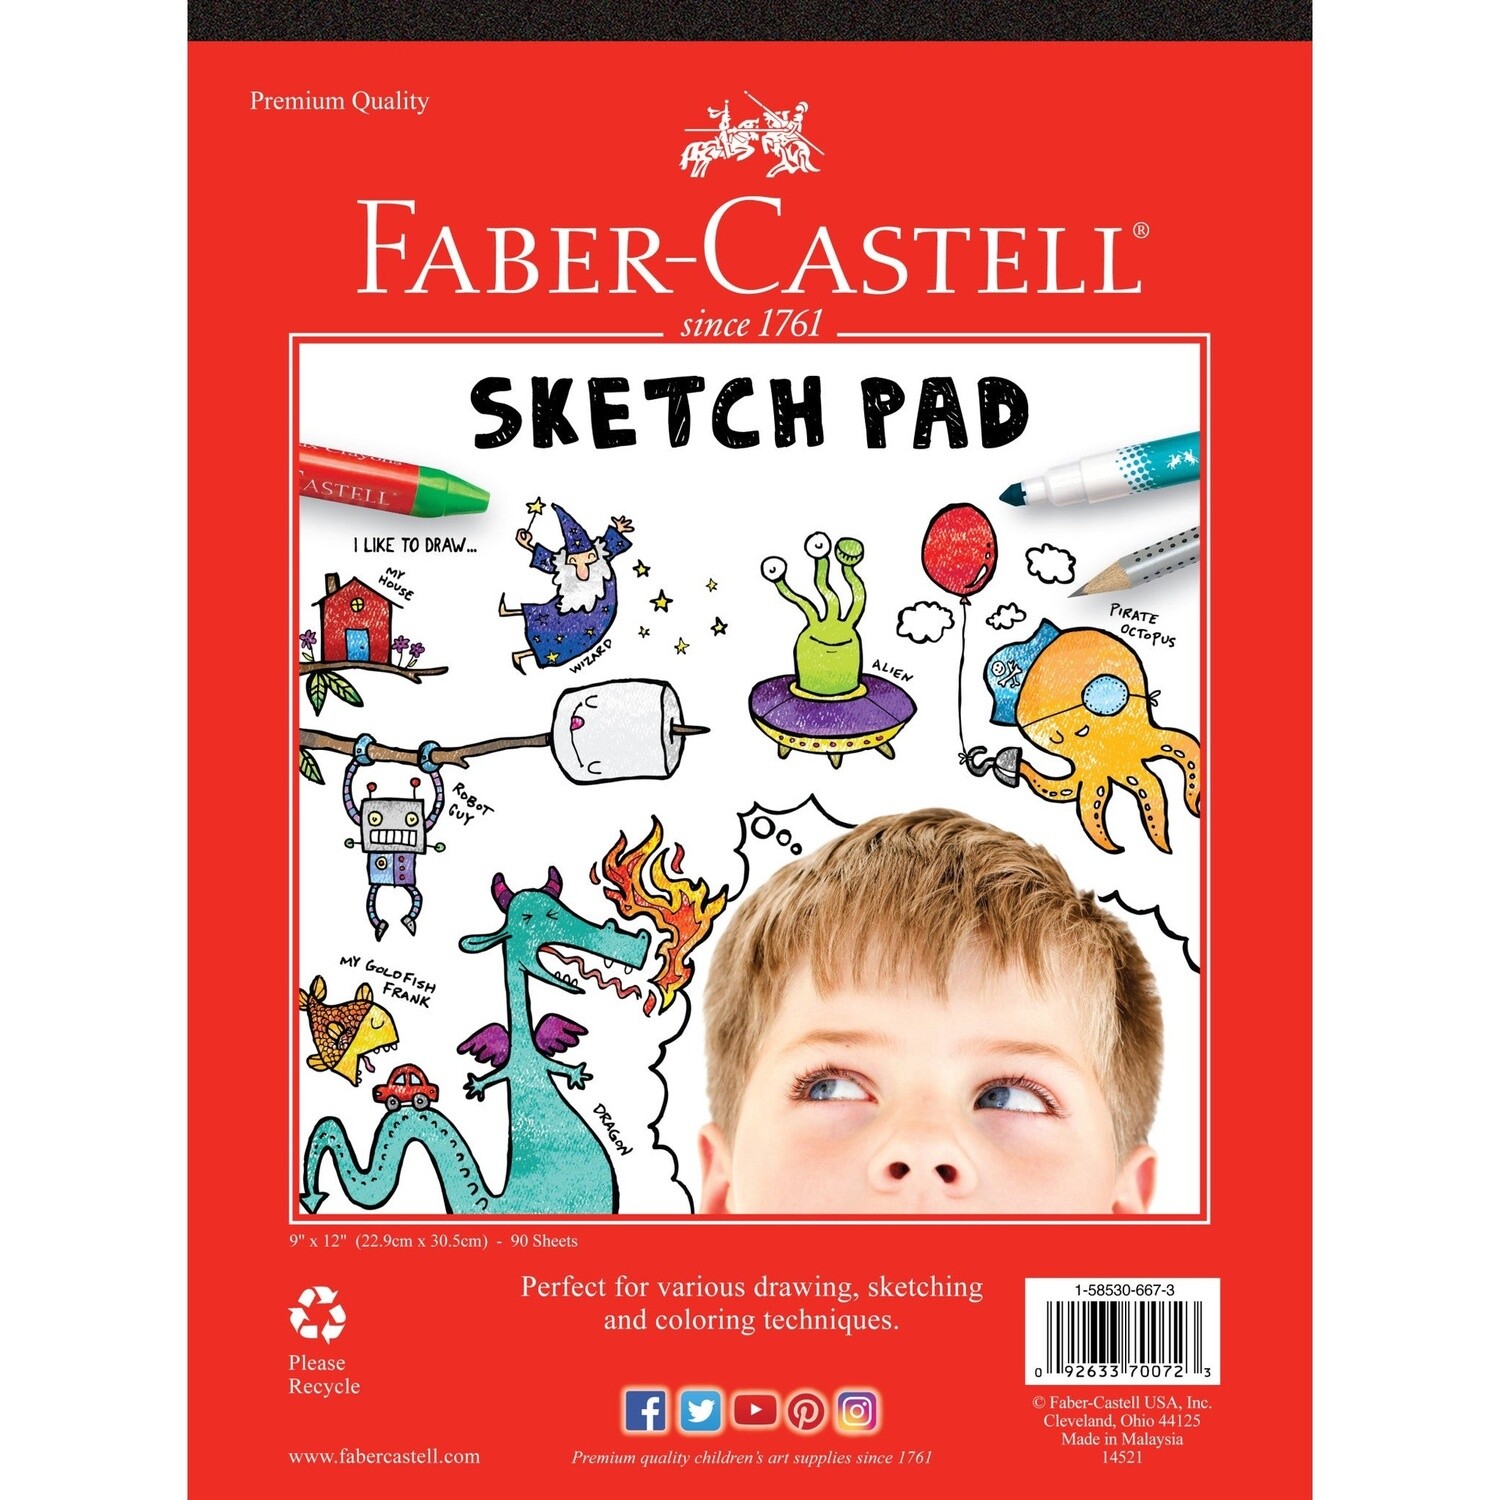 Faber-Castell Sketch Pad 9" x 12"